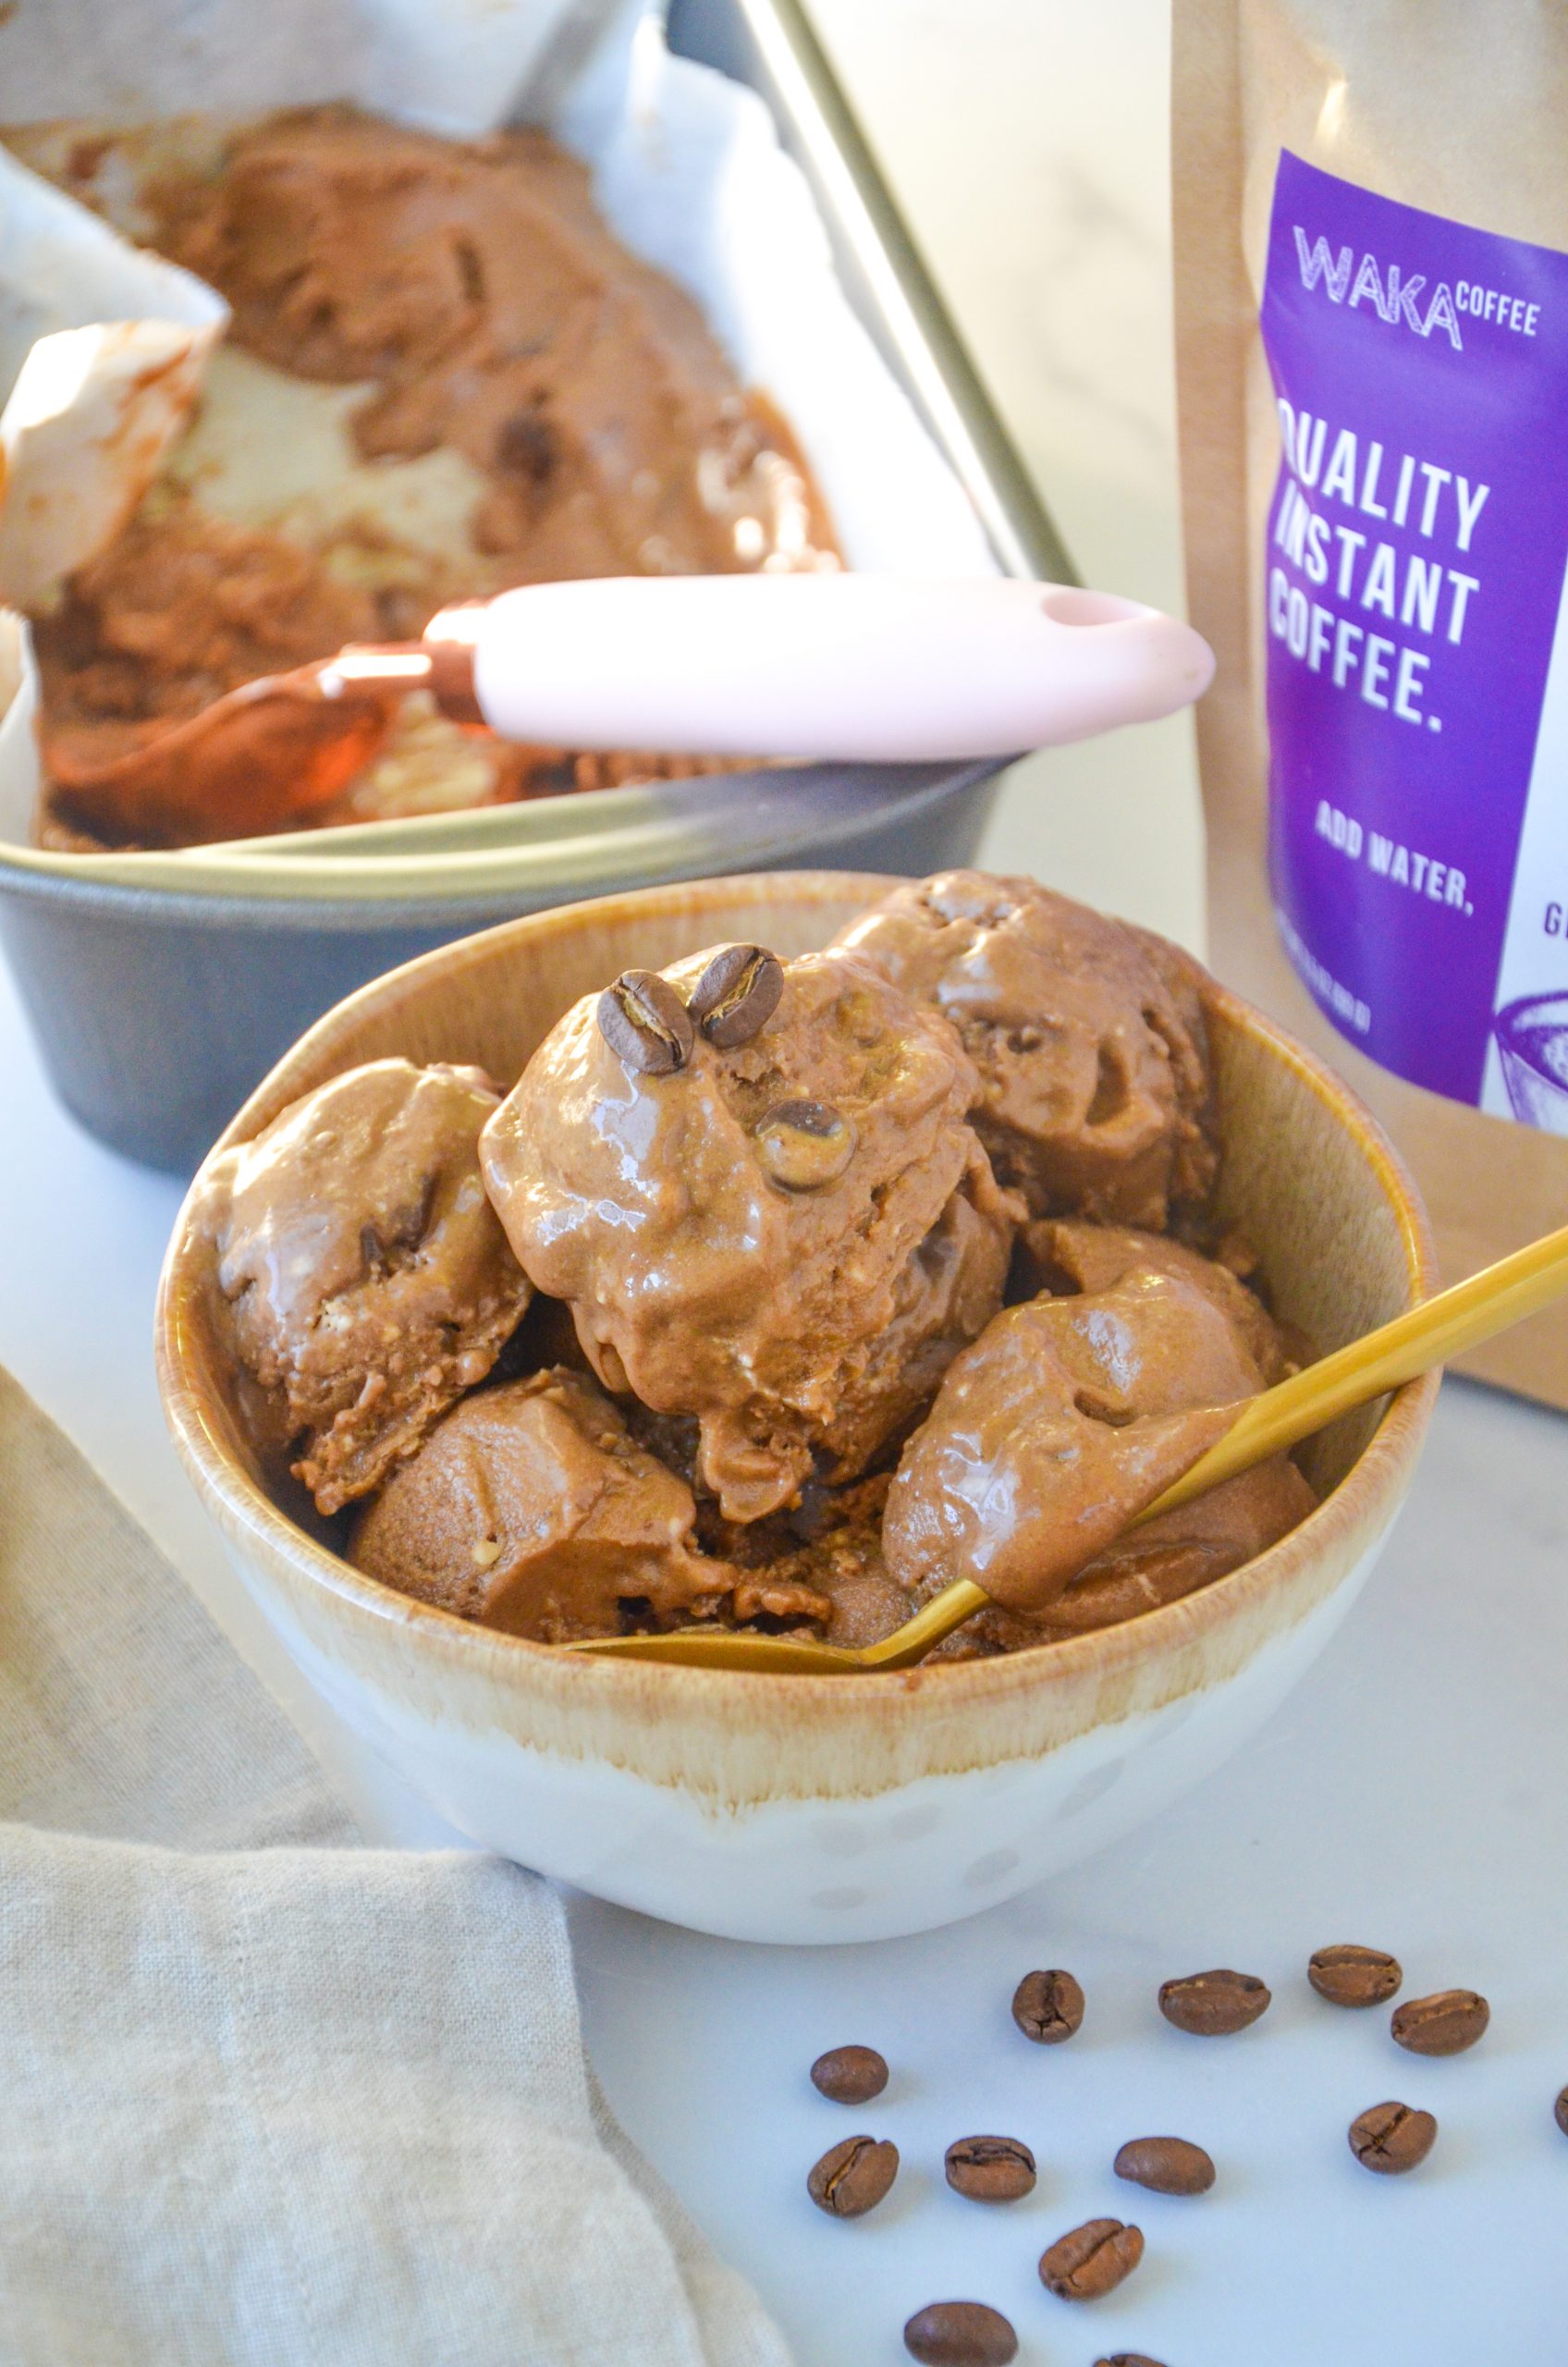 A bowl of coffee ice cream with a spoon inside.